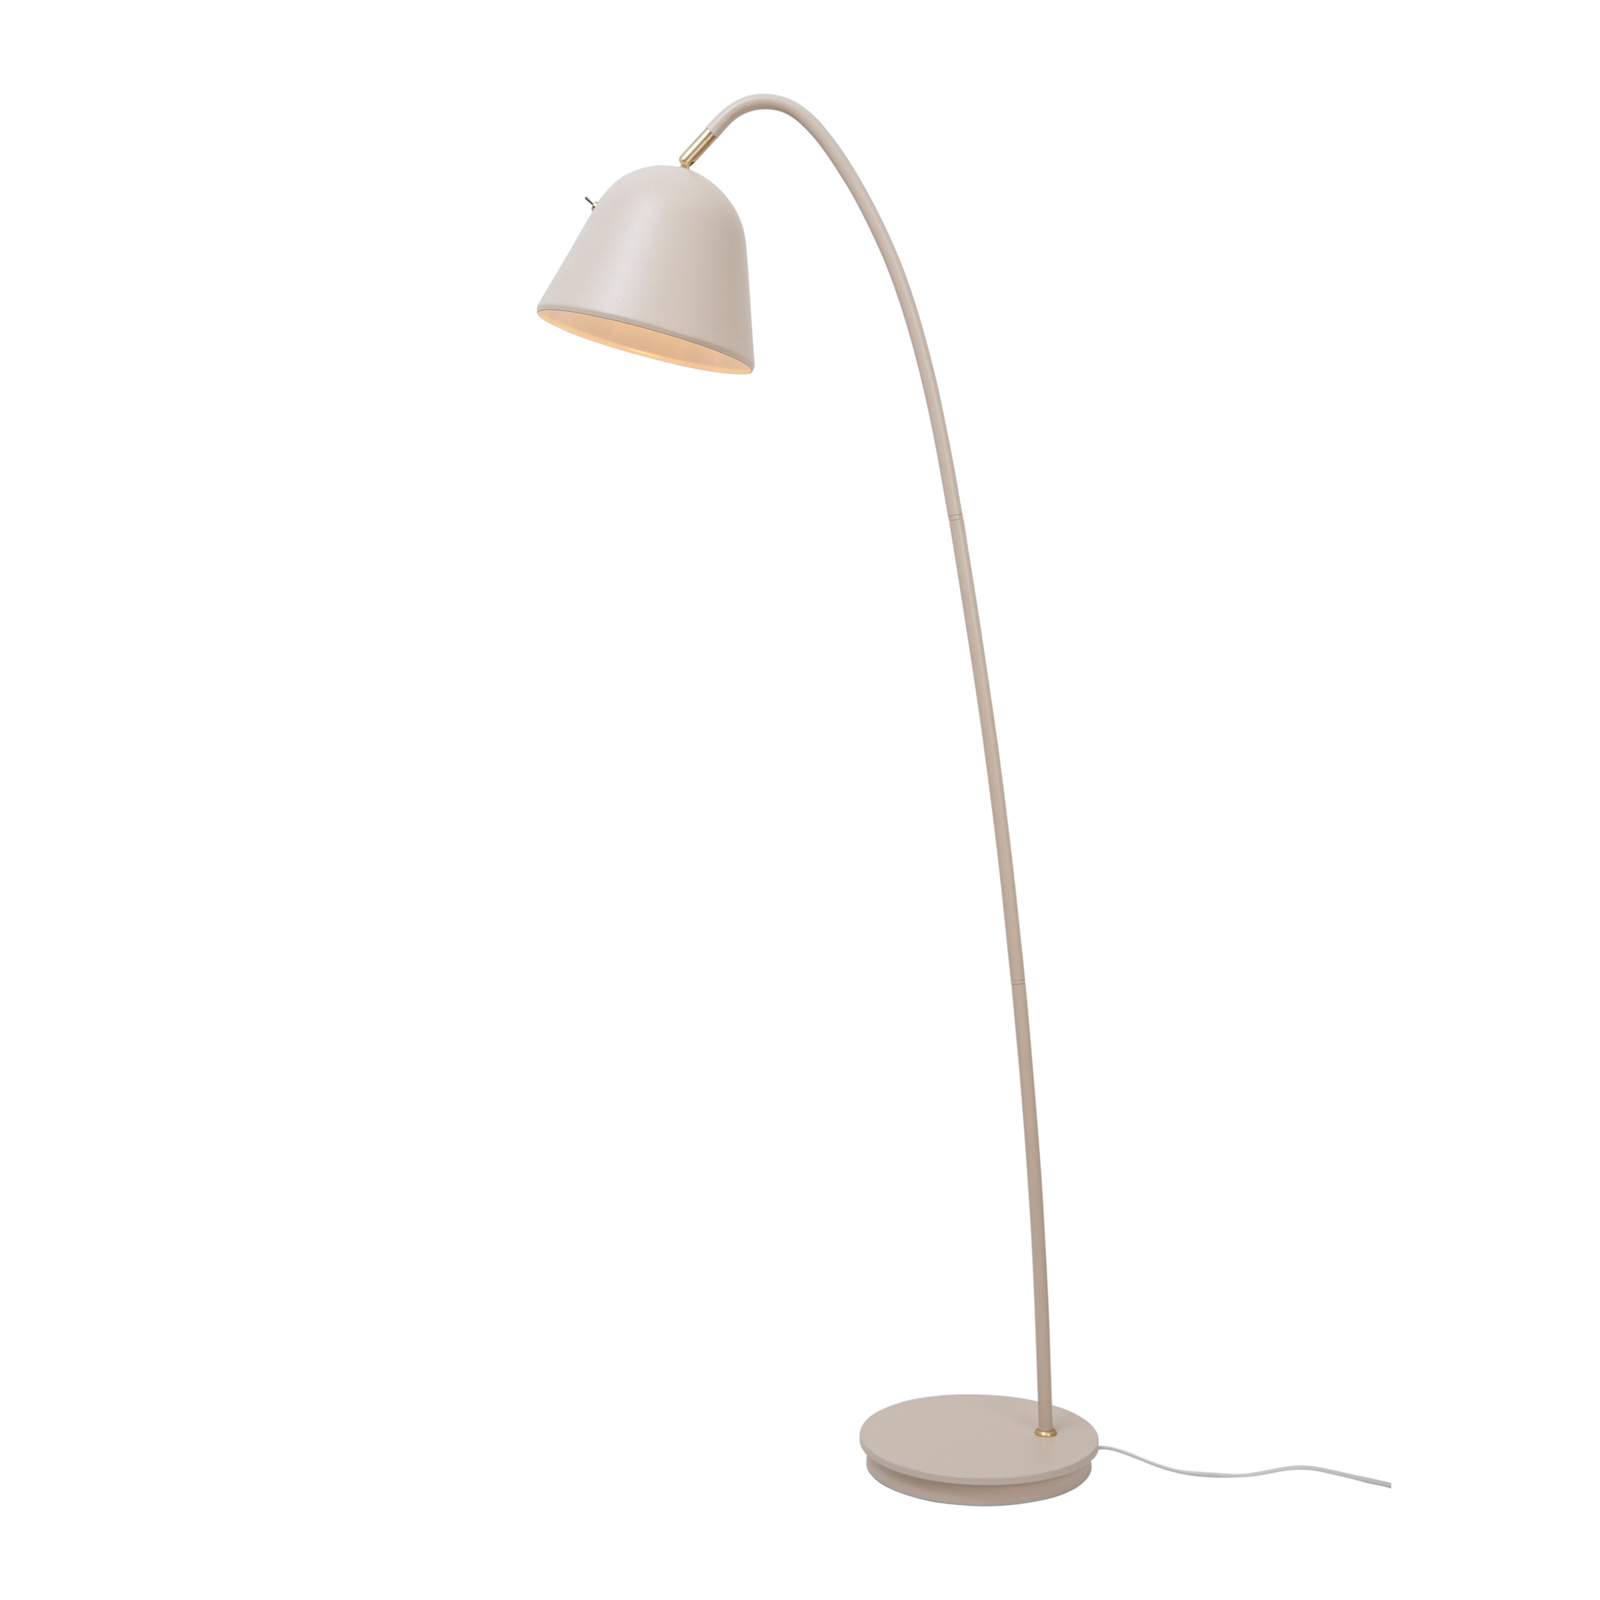 Fleur floor lamp with an adjustable lampshade